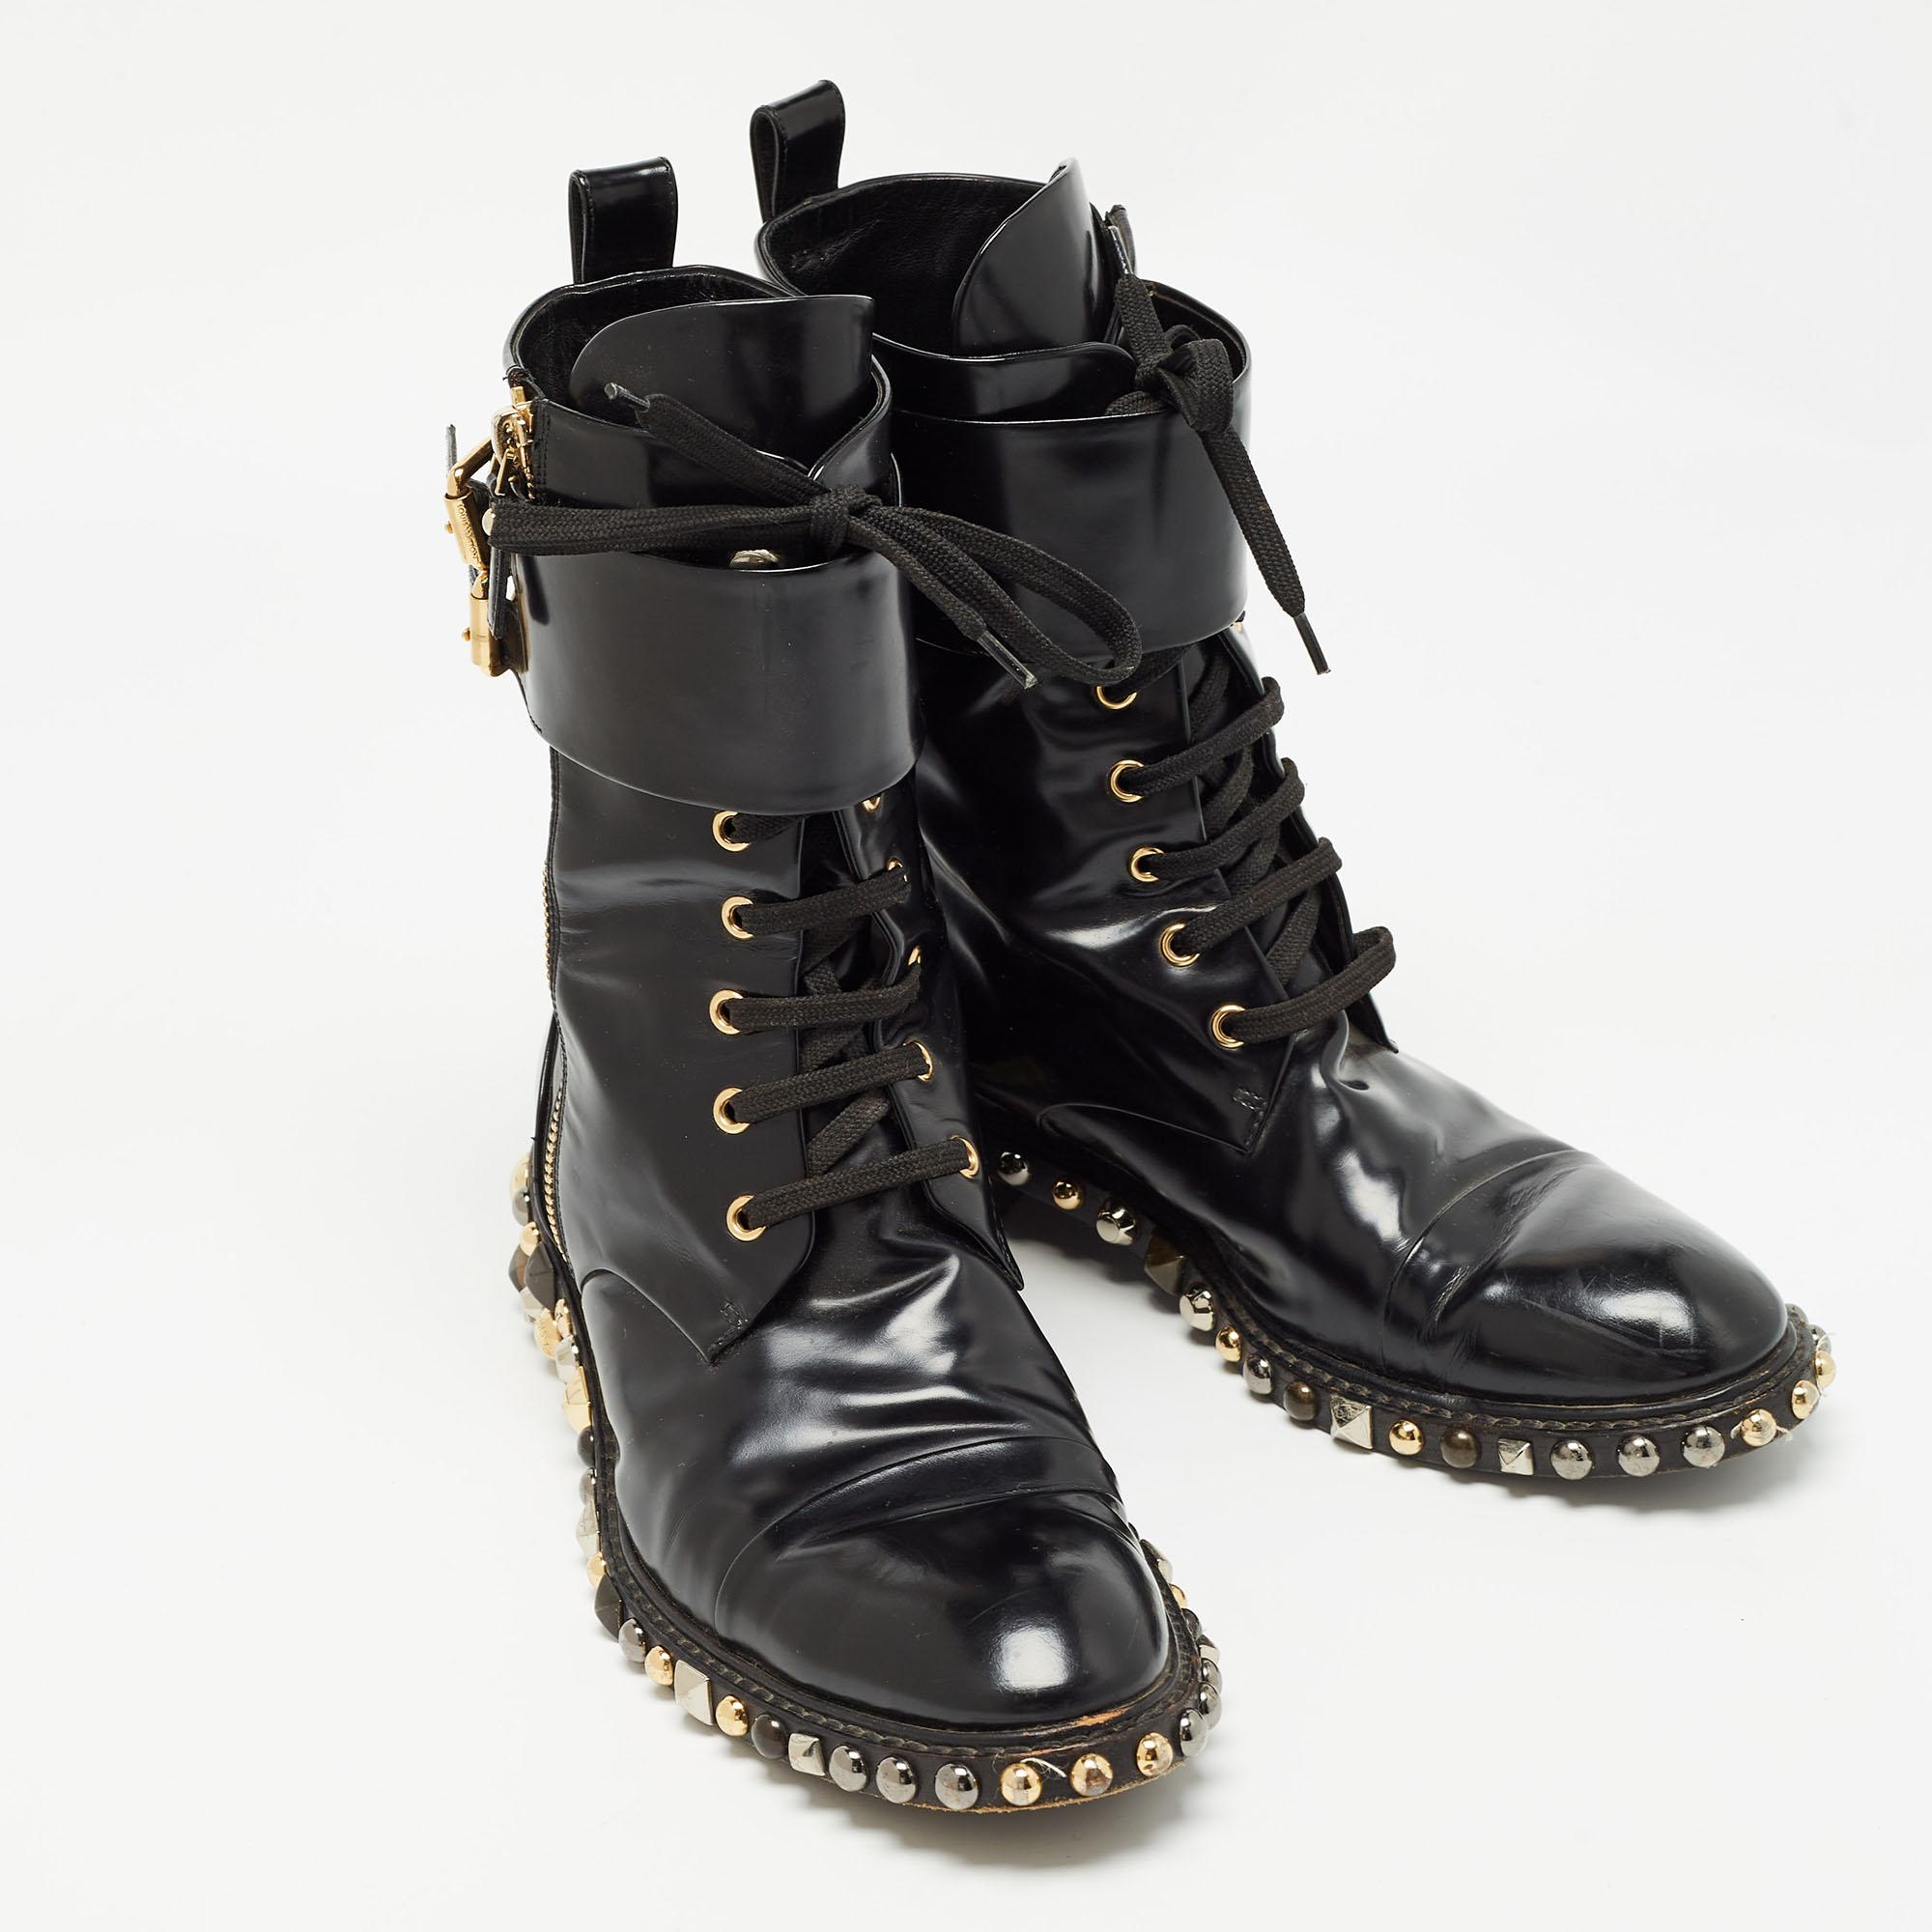 Louis Vuitton Black Patent Leather Embellished Ankle Boots Size 38.5 In Good Condition For Sale In Dubai, Al Qouz 2